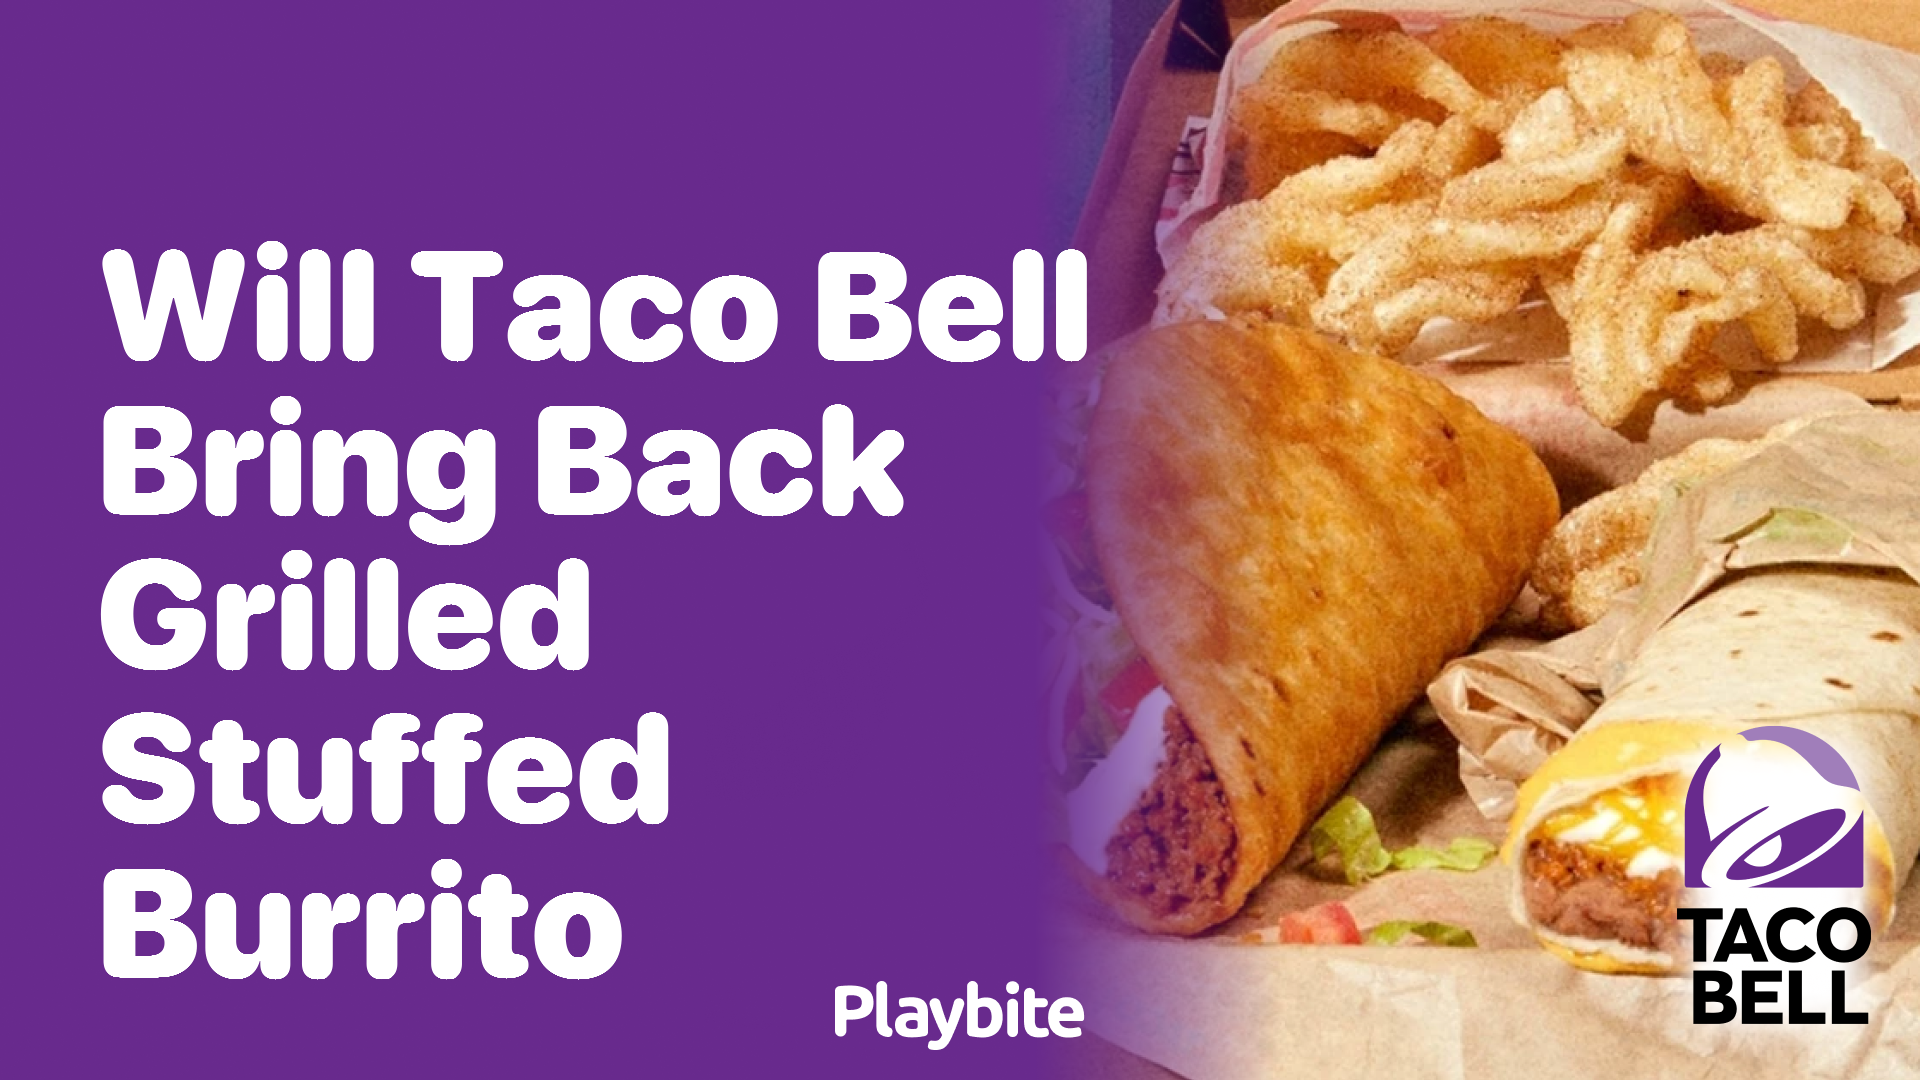 Will Taco Bell Bring Back the Grilled Stuffed Burrito?